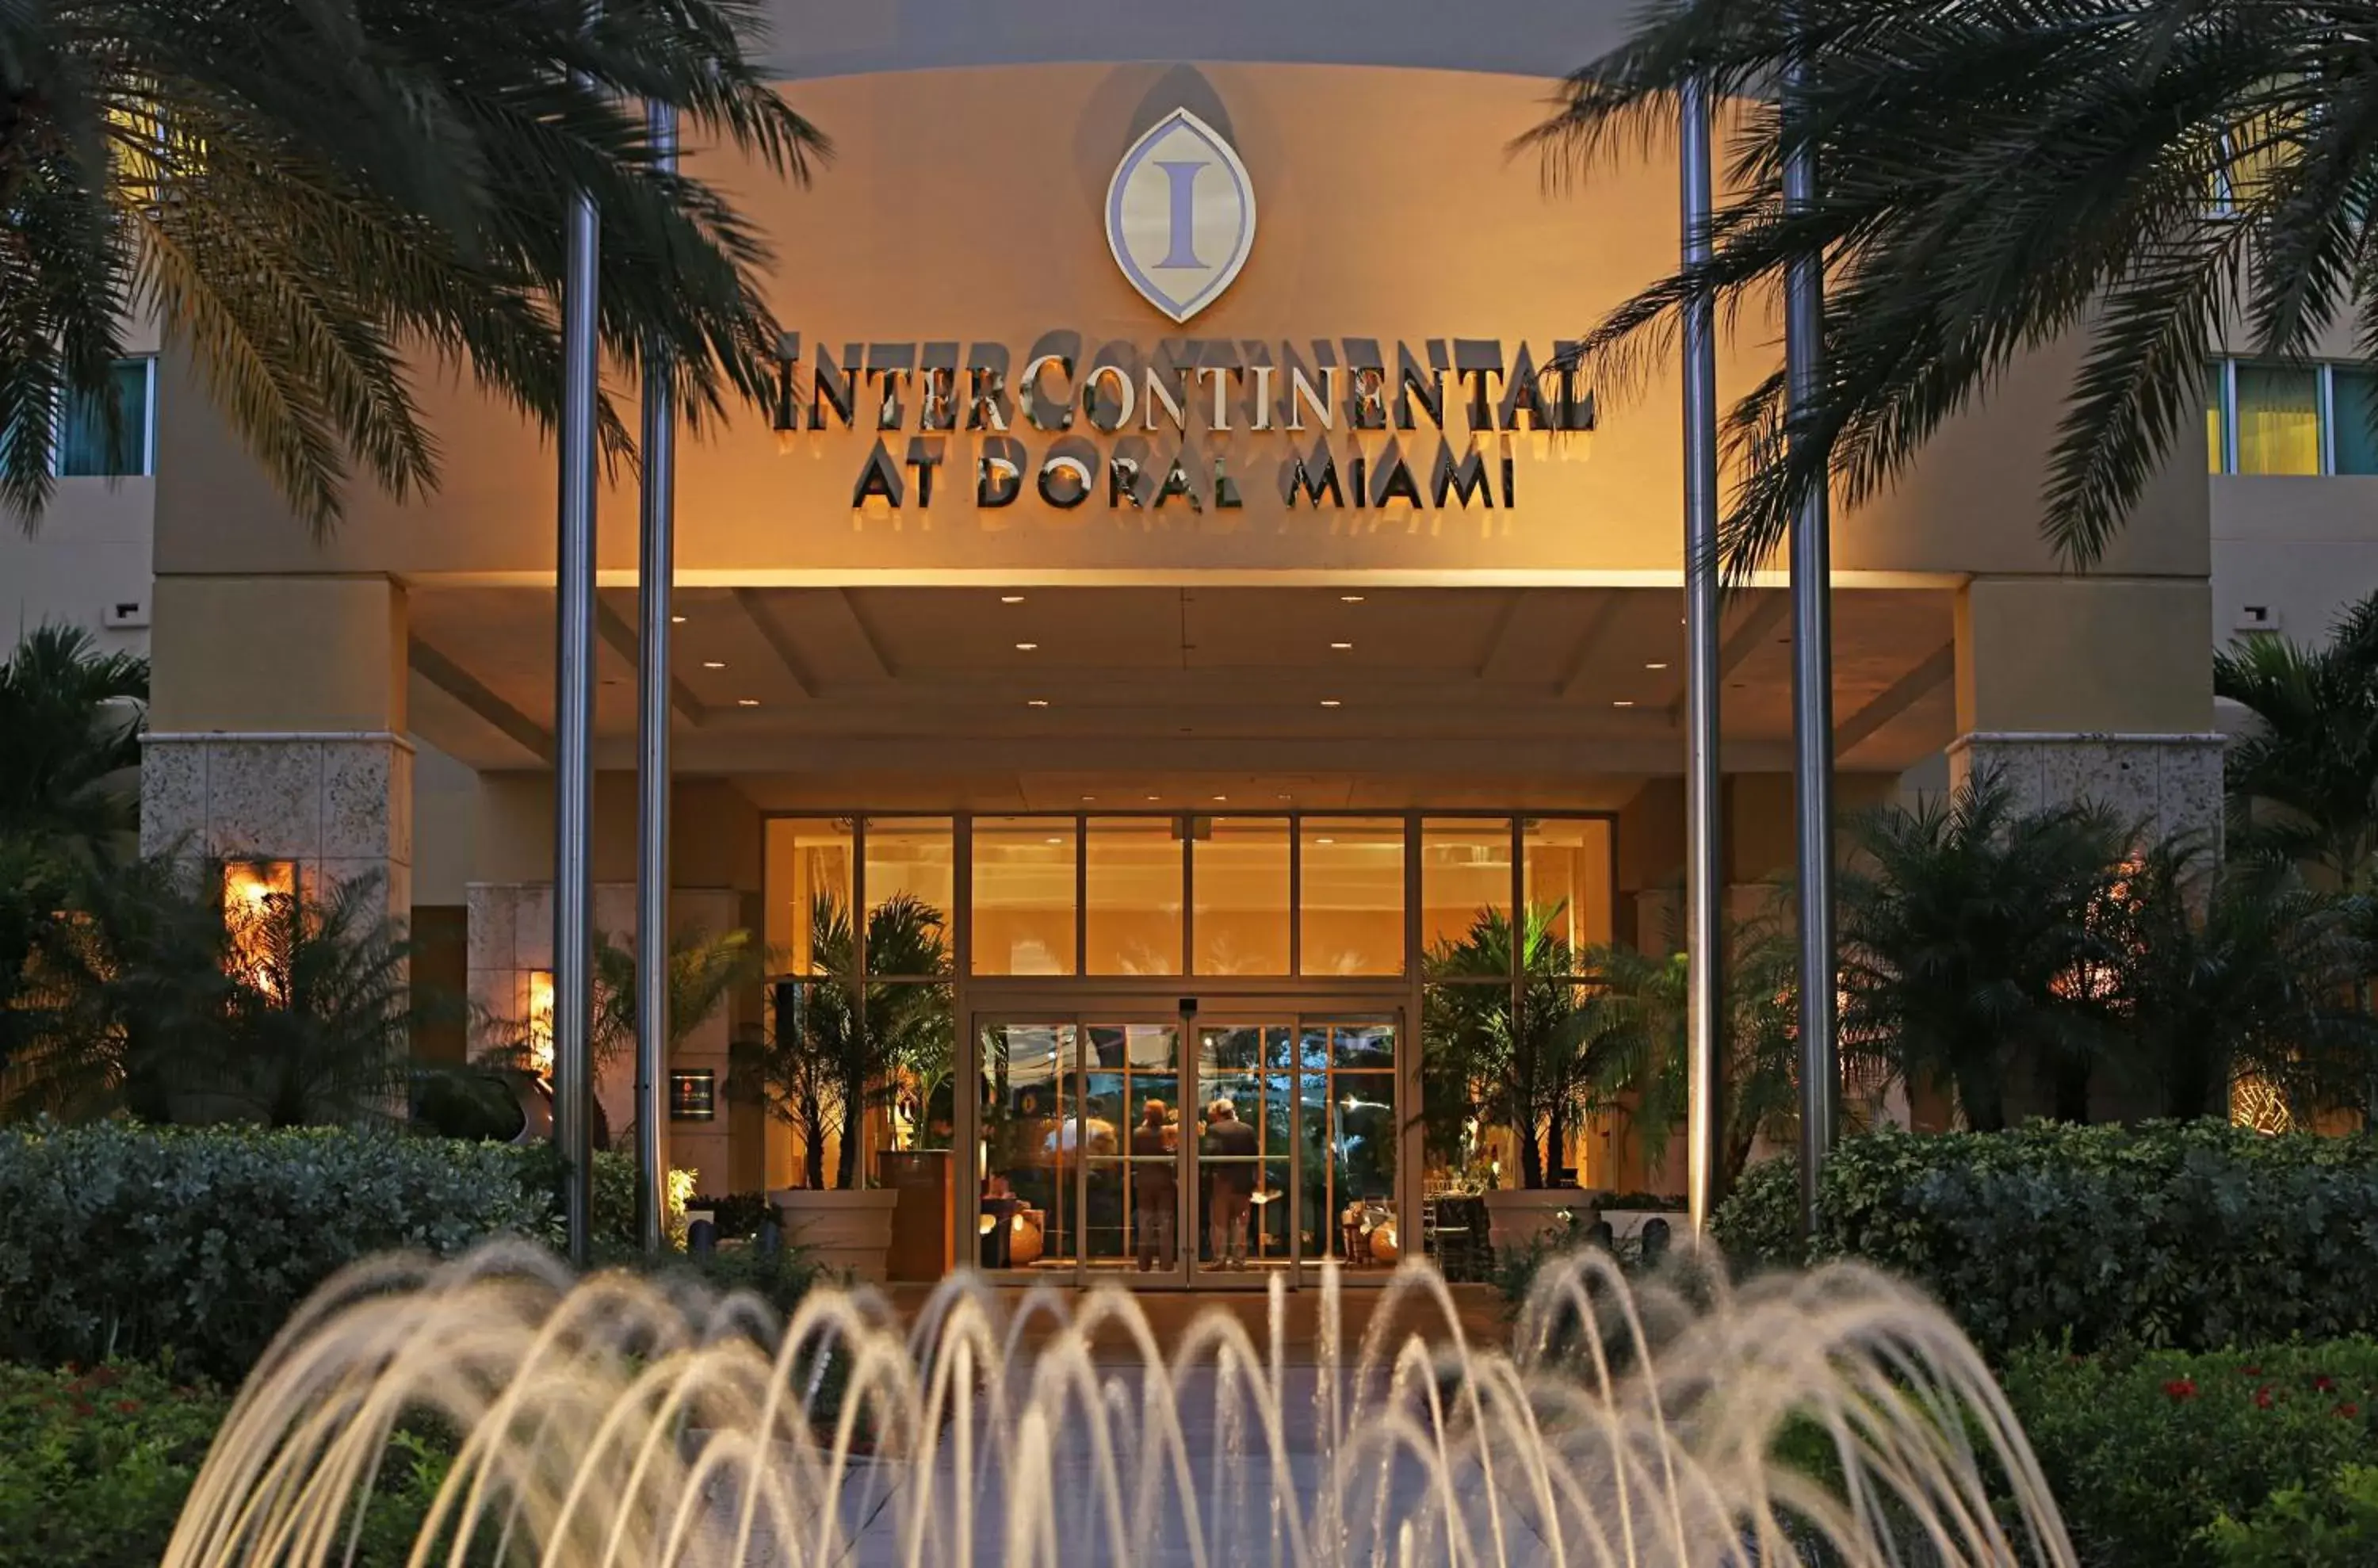 Property building in InterContinental at Doral Miami, an IHG Hotel